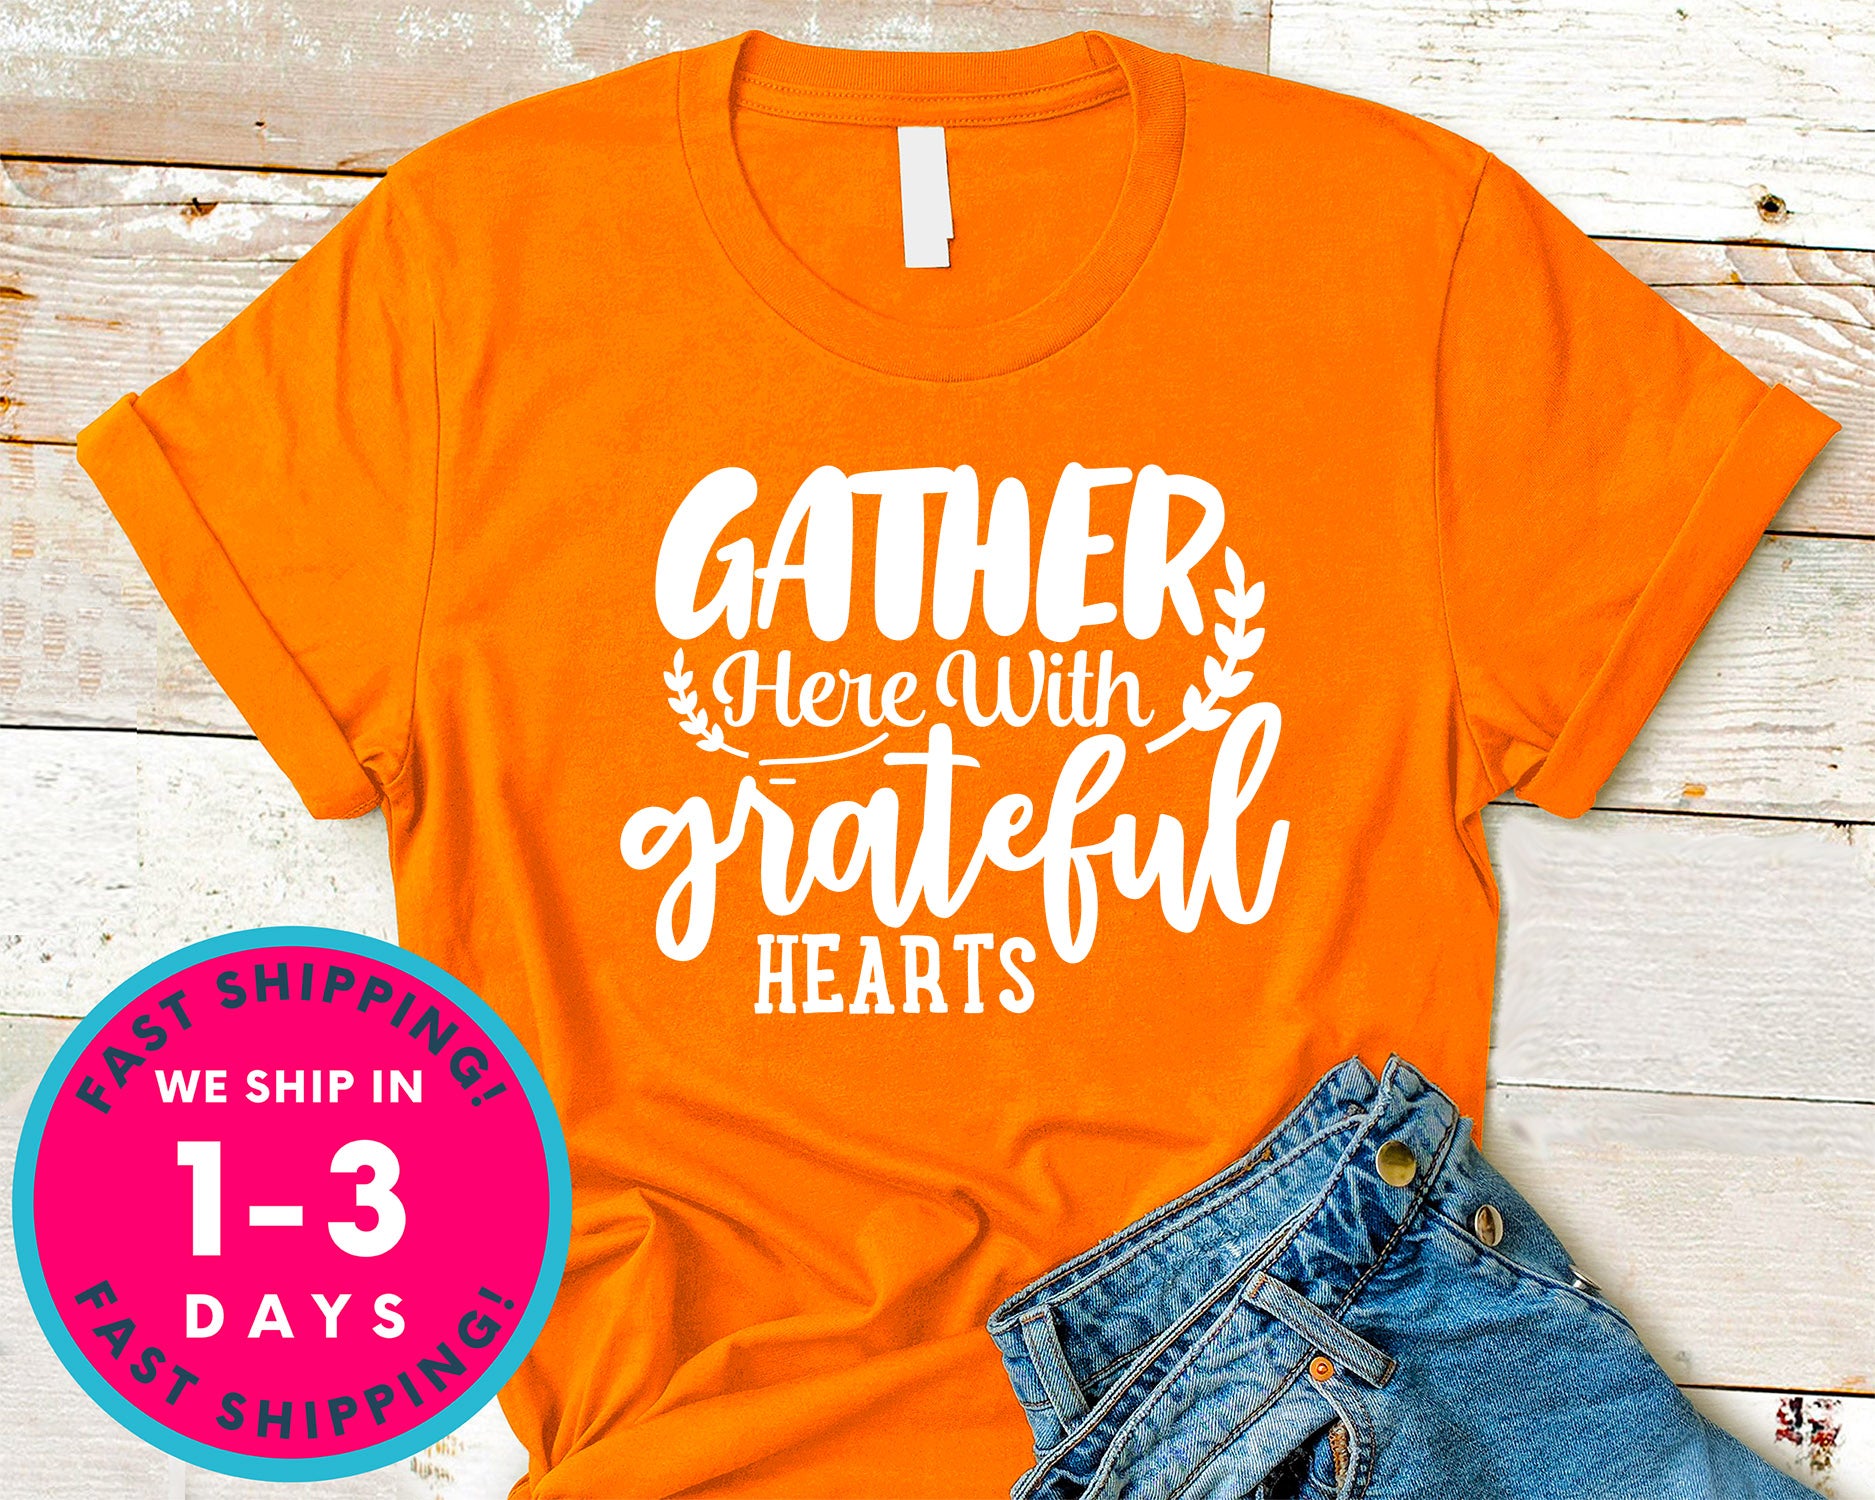 Gather Here With Grateful Hearts